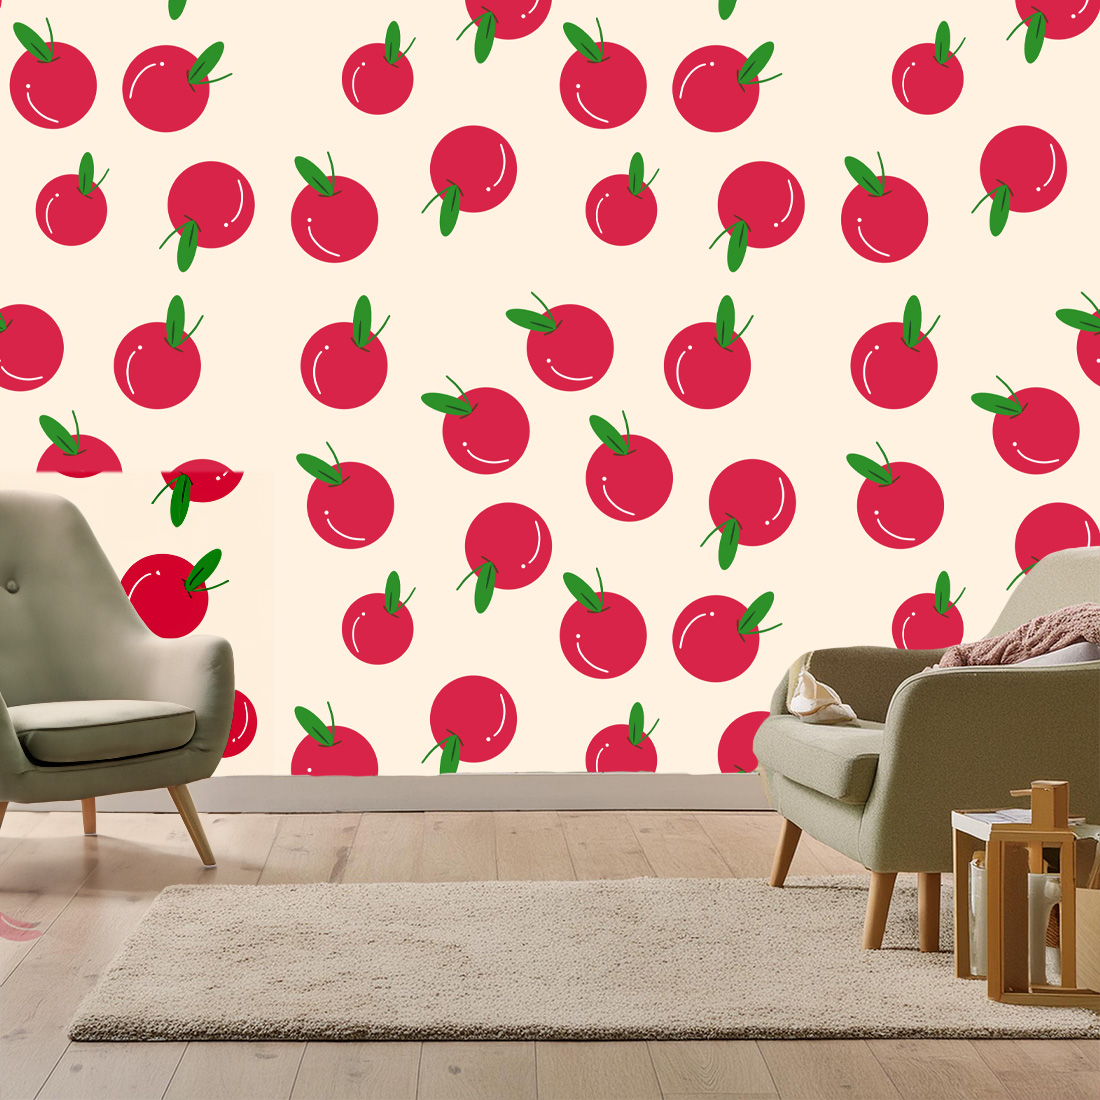 Seamless cherry pattern wallpaper, gift wrapping paper etc preview image.